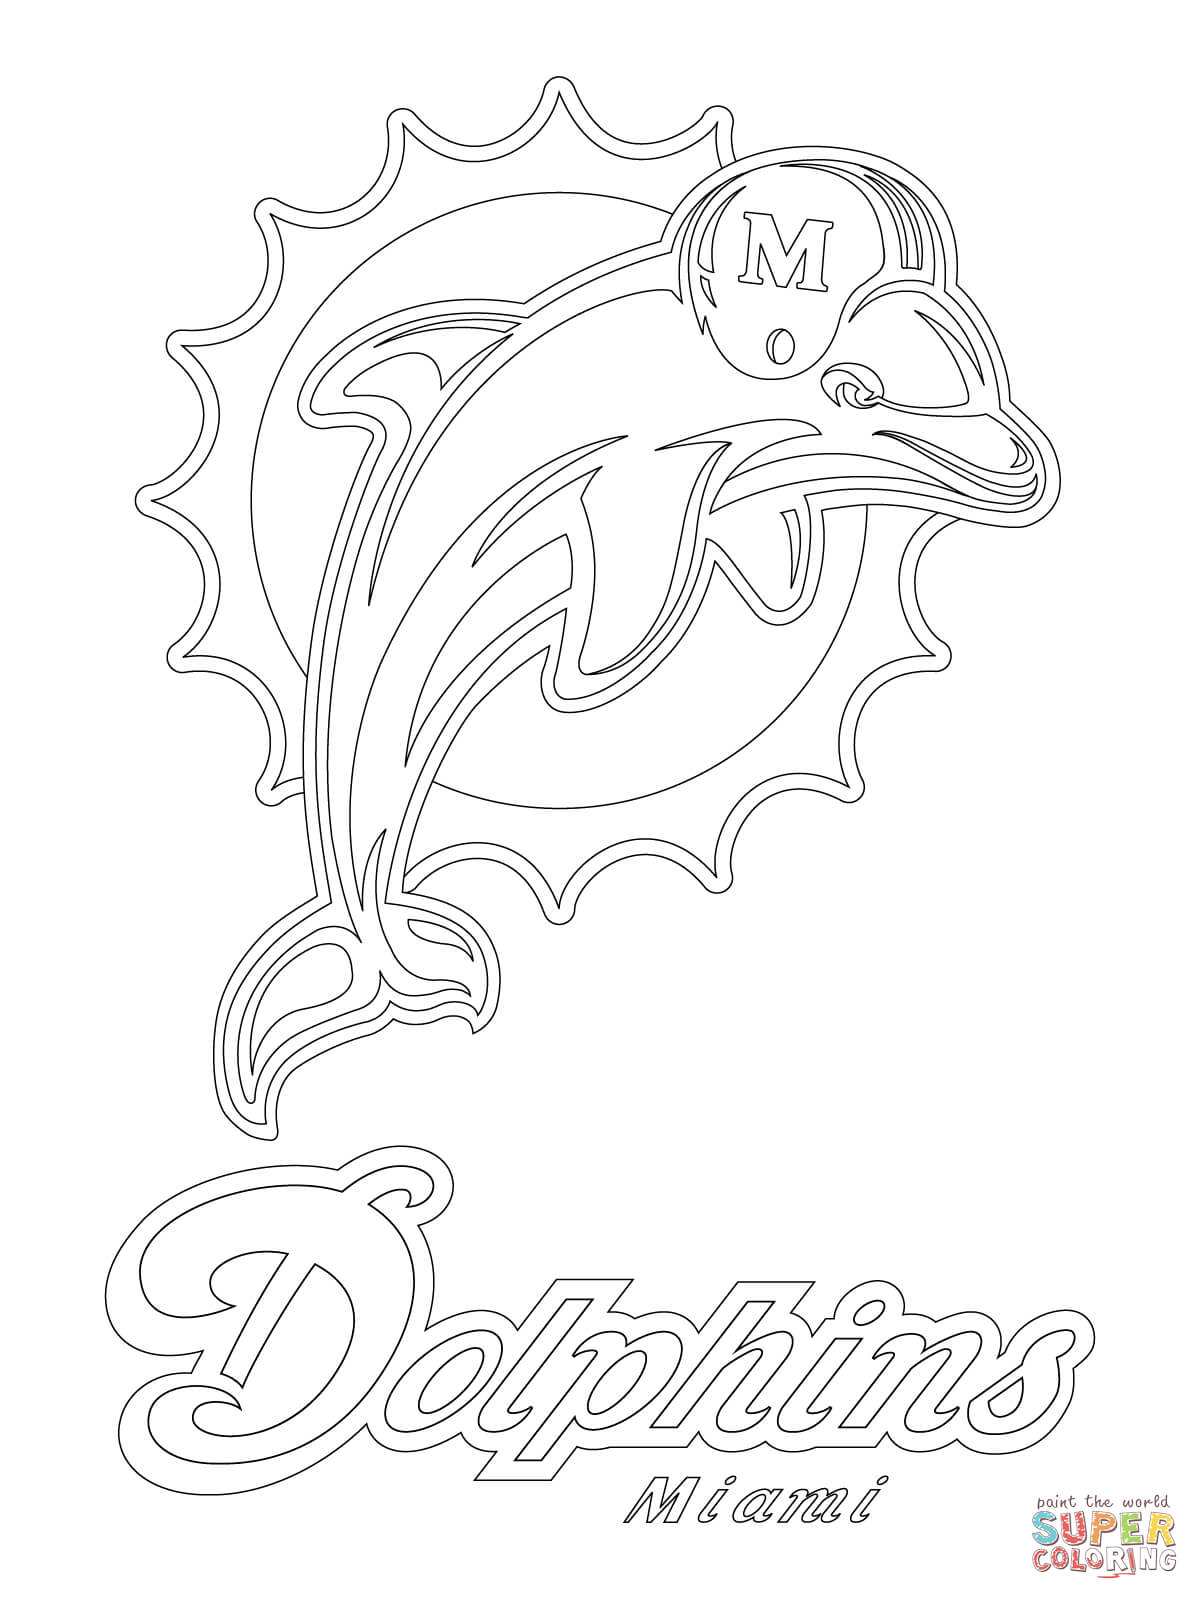 miami-dolphins-logo-coloring-page-free-printable-coloring-pages